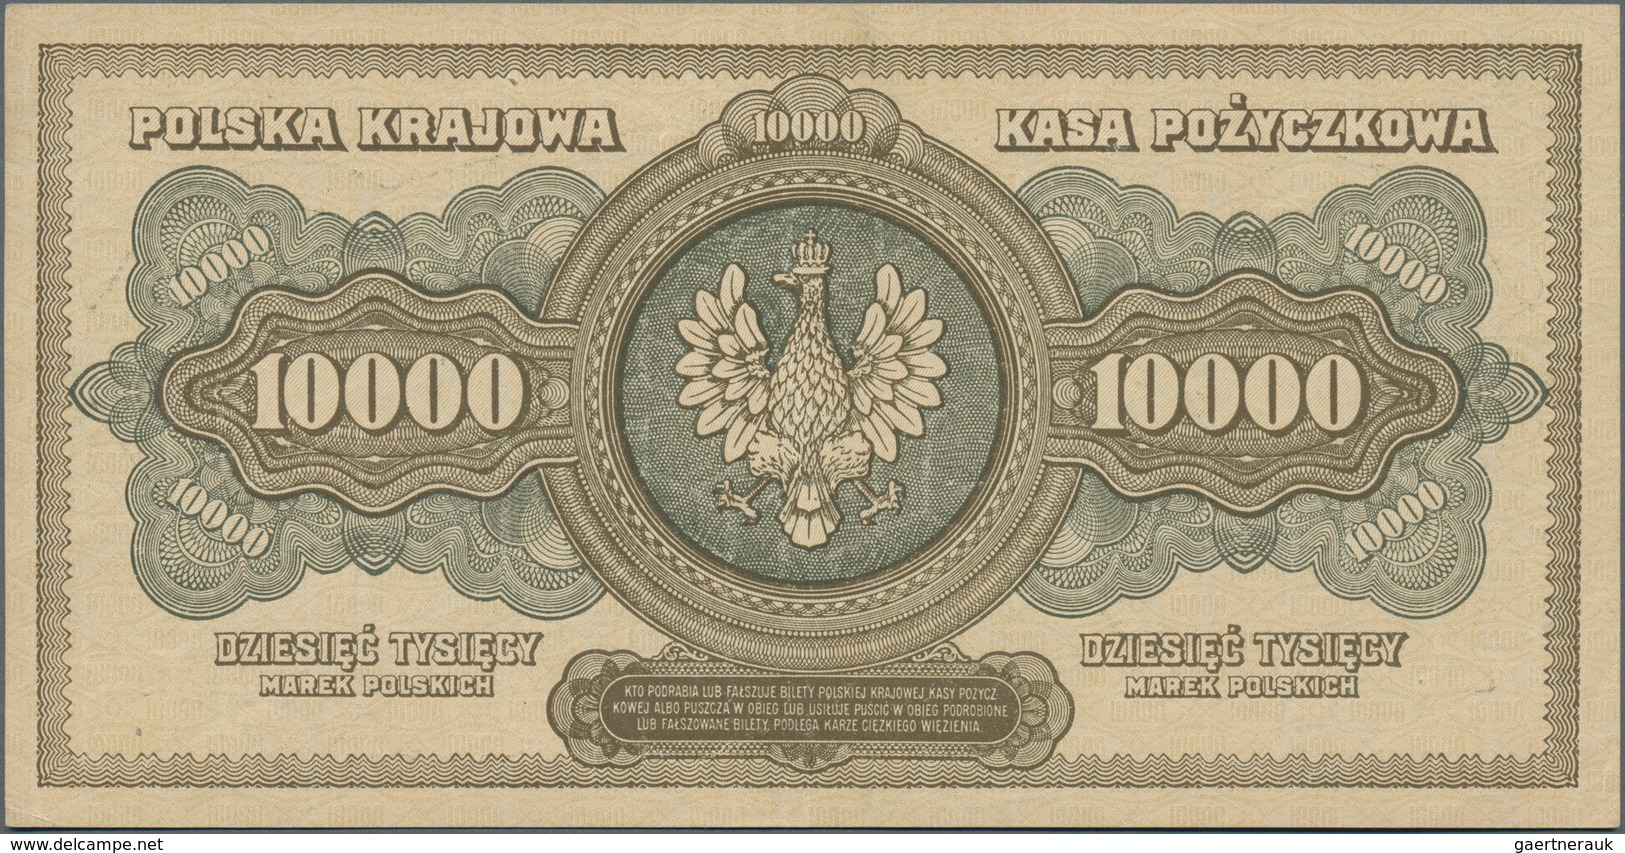 Poland / Polen: Set with 5 banknotes of the 1920’s issue comprising 10.000 Marek 1922 (XF), 50.000 M